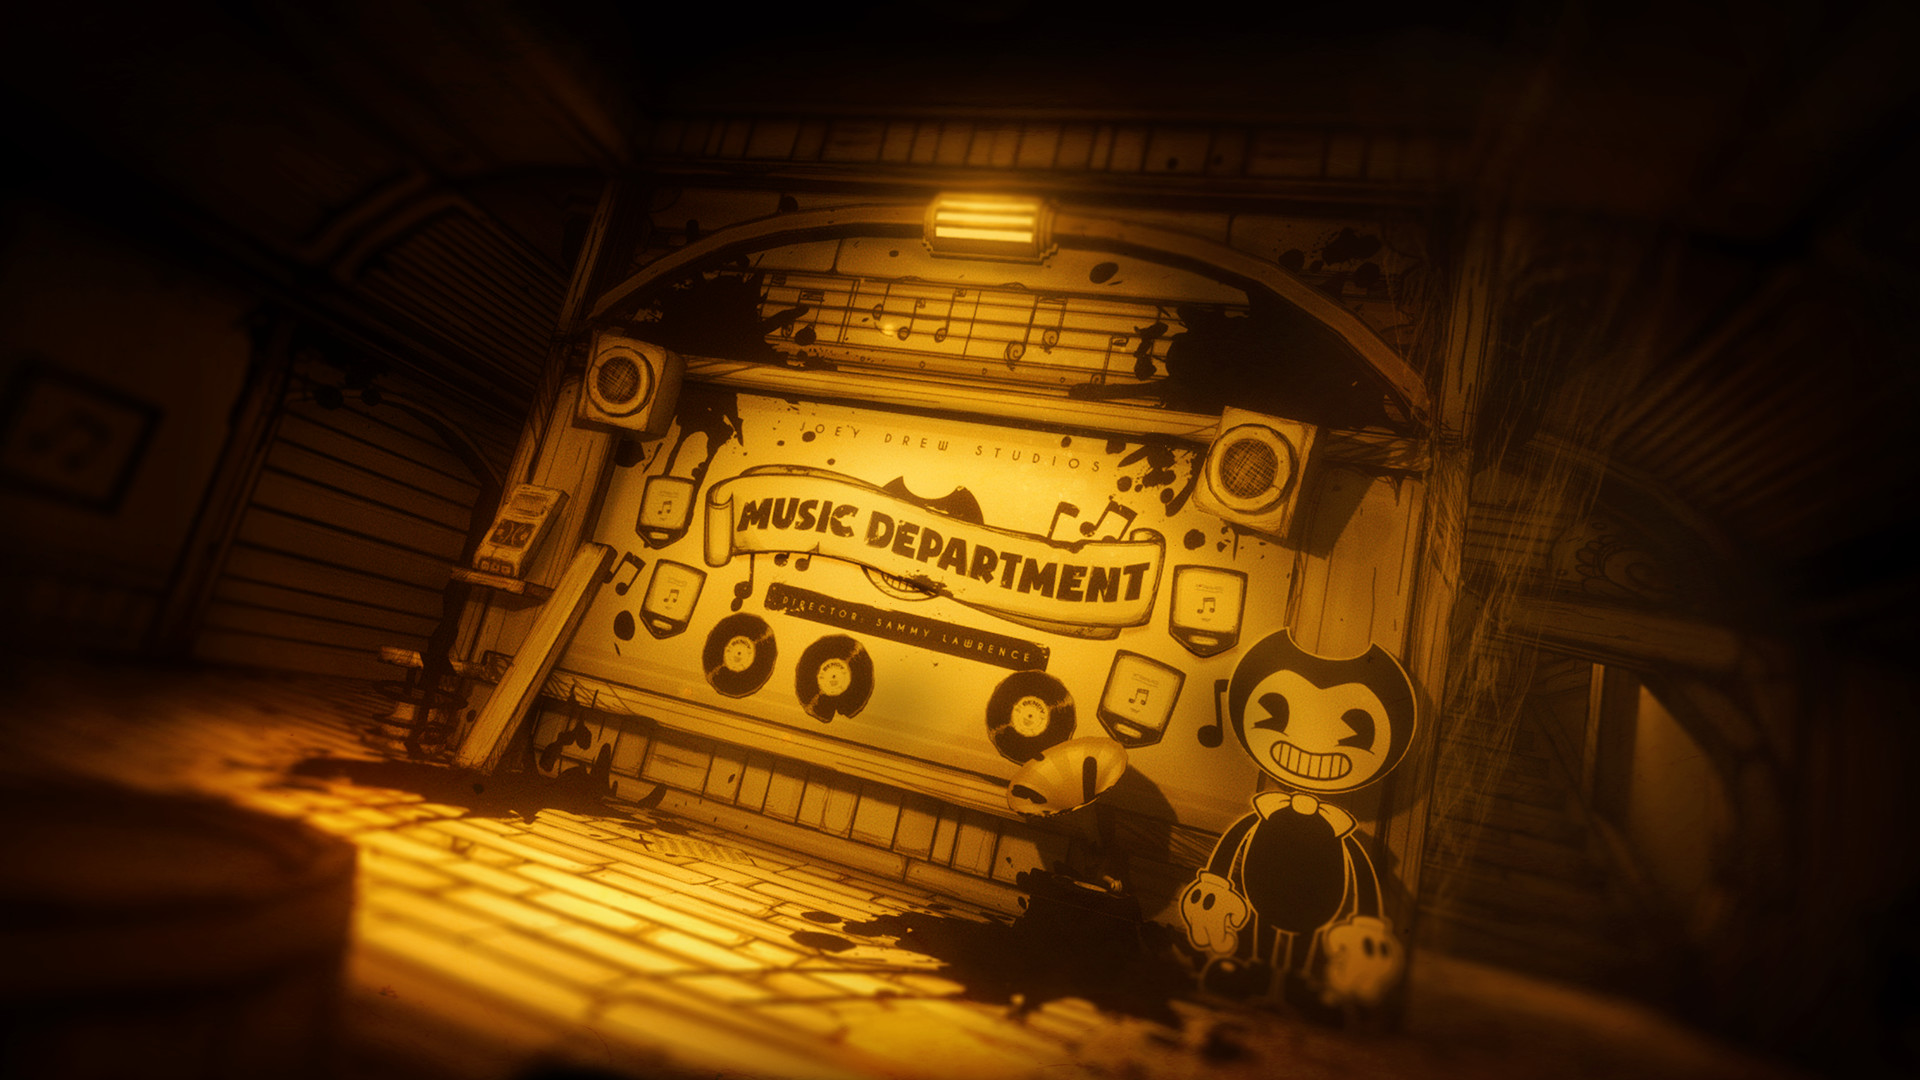 Save 20% on Bendy and the Ink Machine on Steam